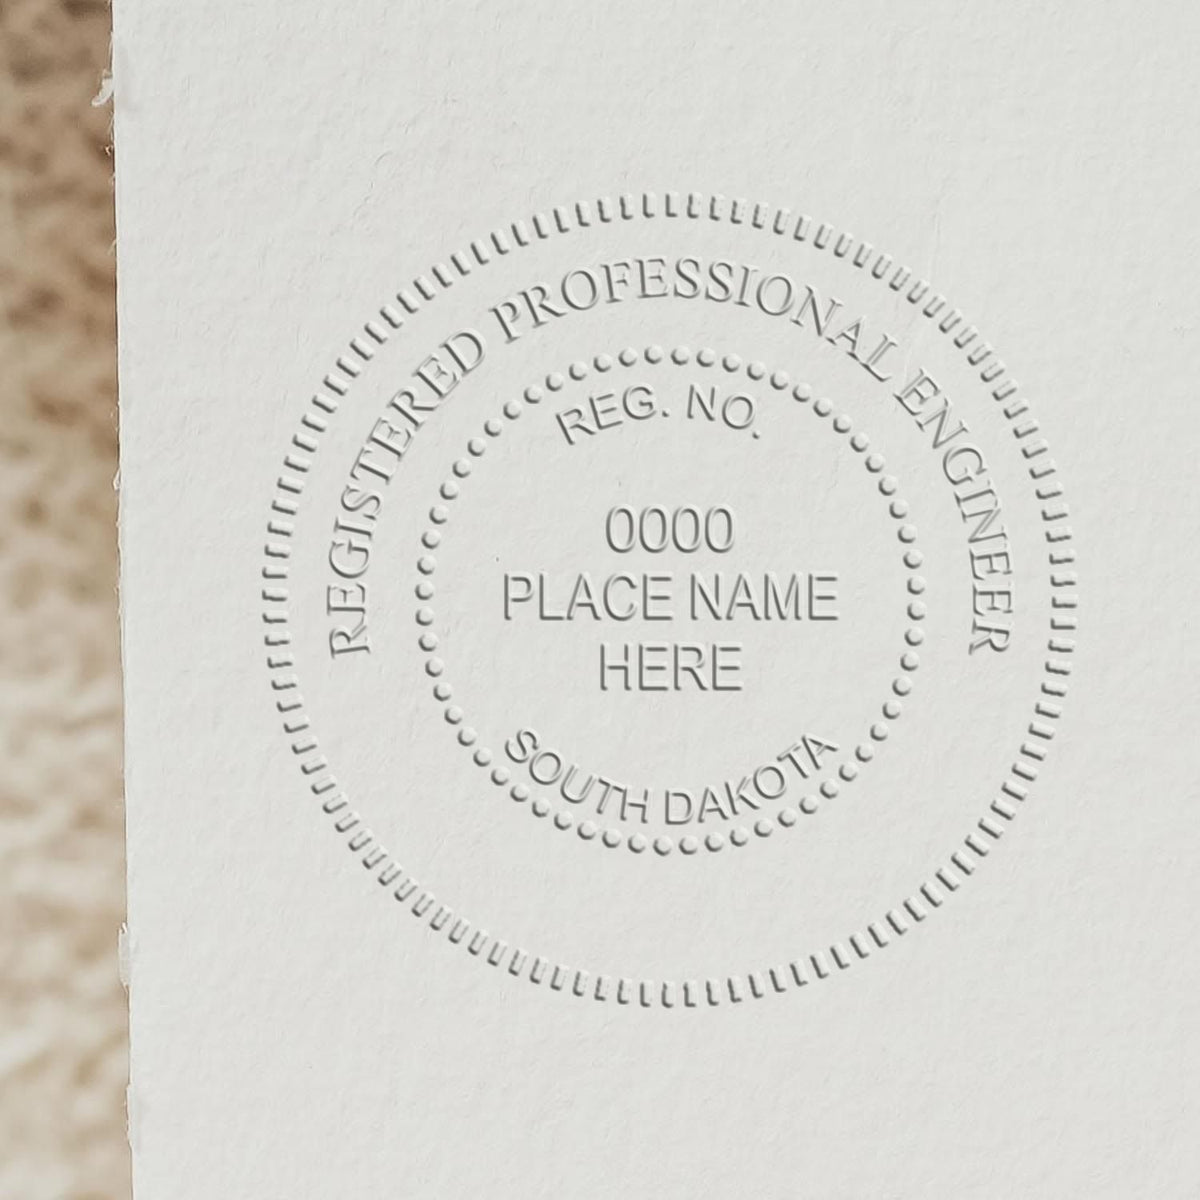 A stamped impression of the Soft South Dakota Professional Engineer Seal in this stylish lifestyle photo, setting the tone for a unique and personalized product.